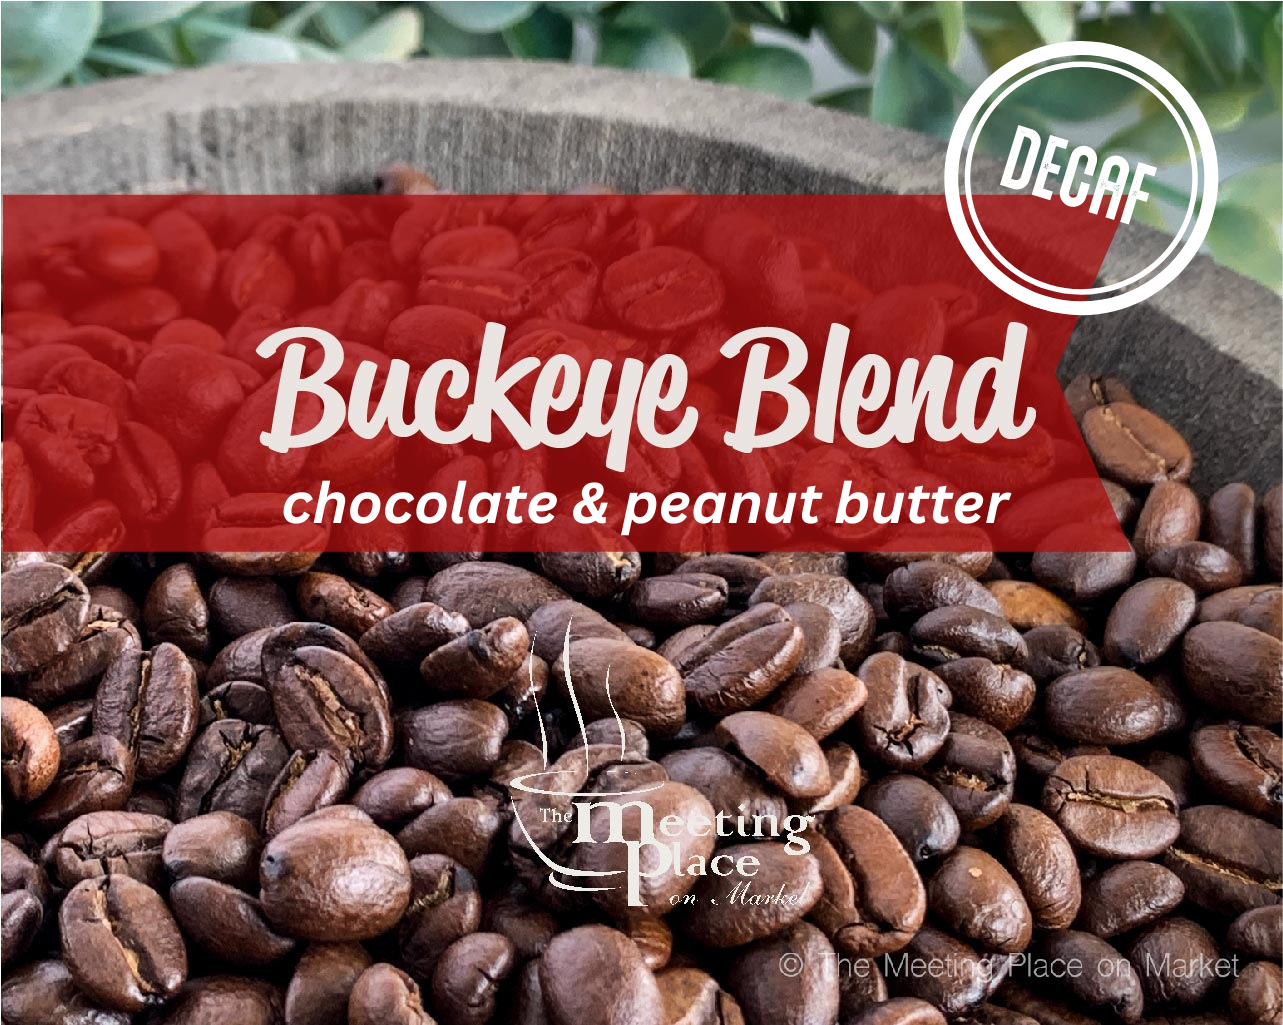 DECAF Buckeye Blend | Chocolate & Peanut Butter Flavored Coffee Beans / Ground Coffee